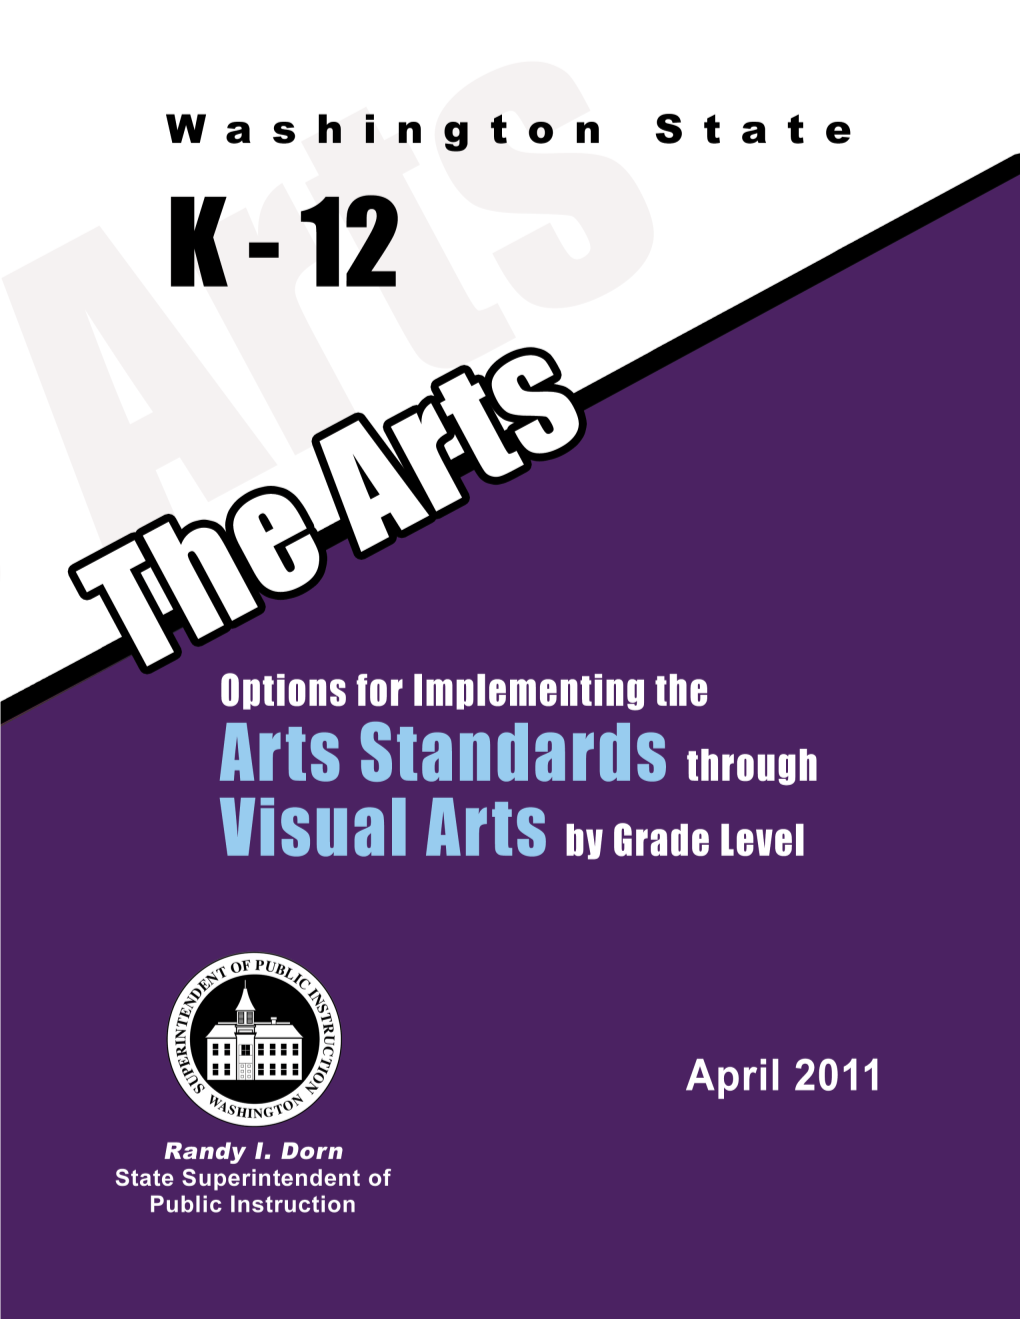 Options for Implementing the Arts Standards Through Visual Arts by Grade Level